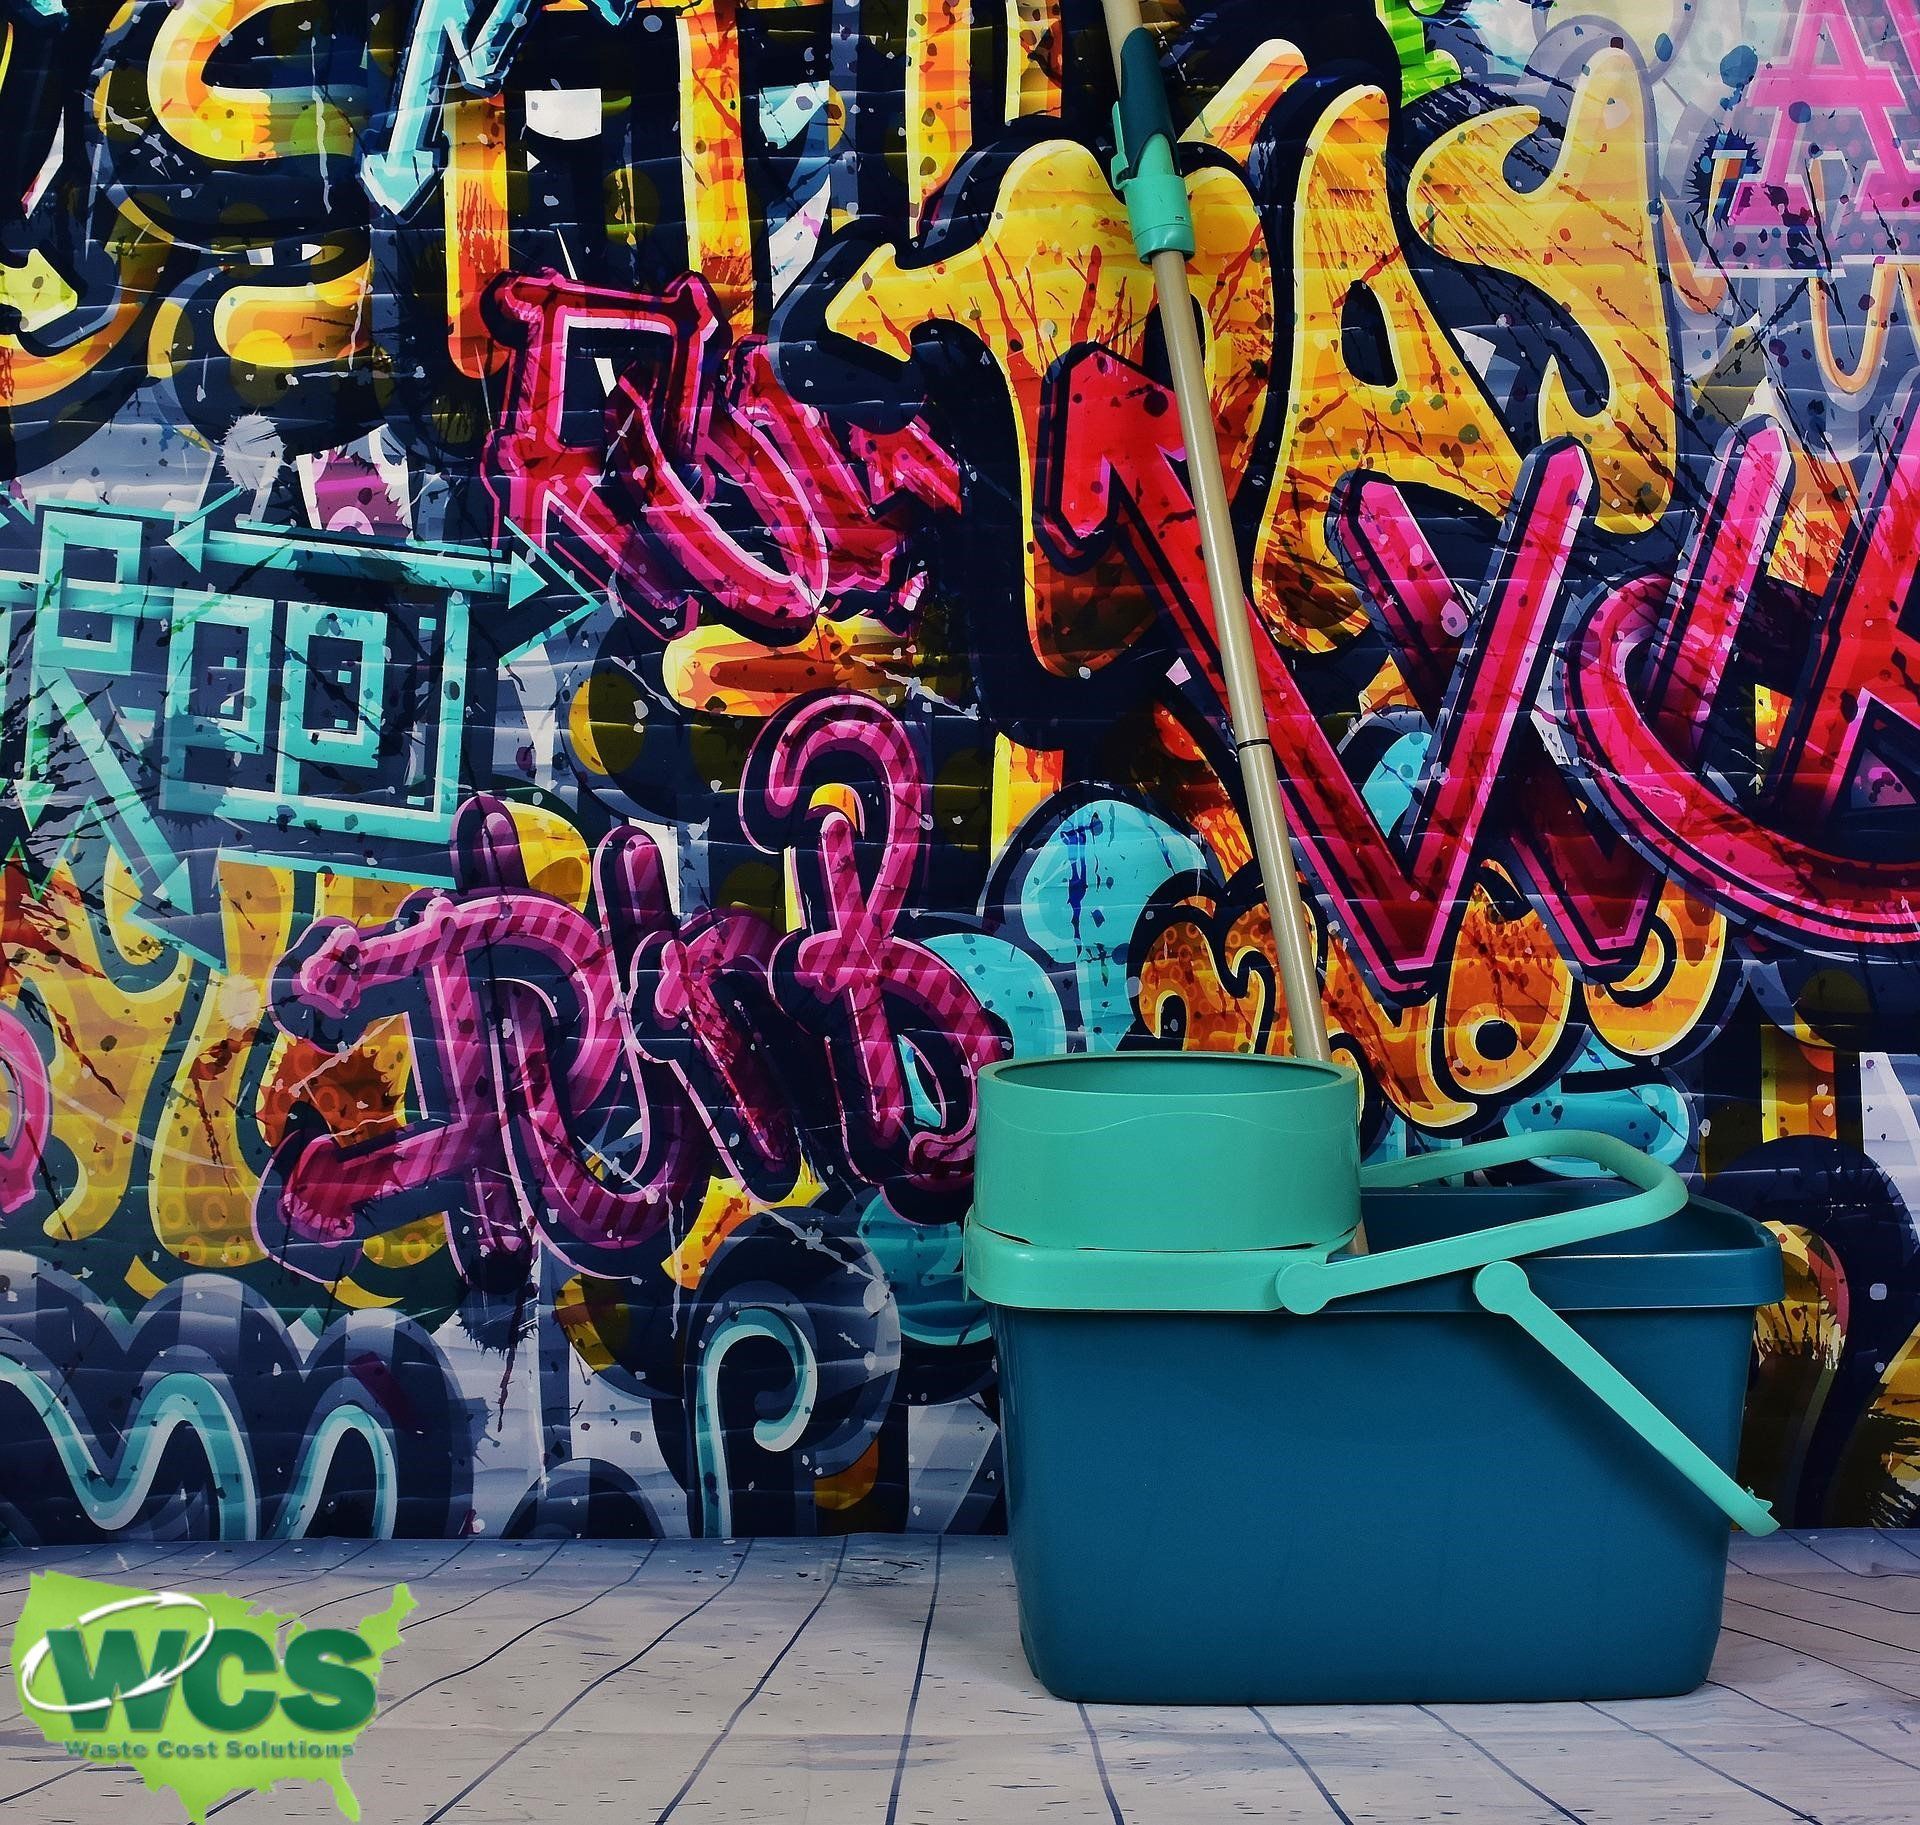 Graffiti Removal for Facilities Management by Waste Cost Solutions